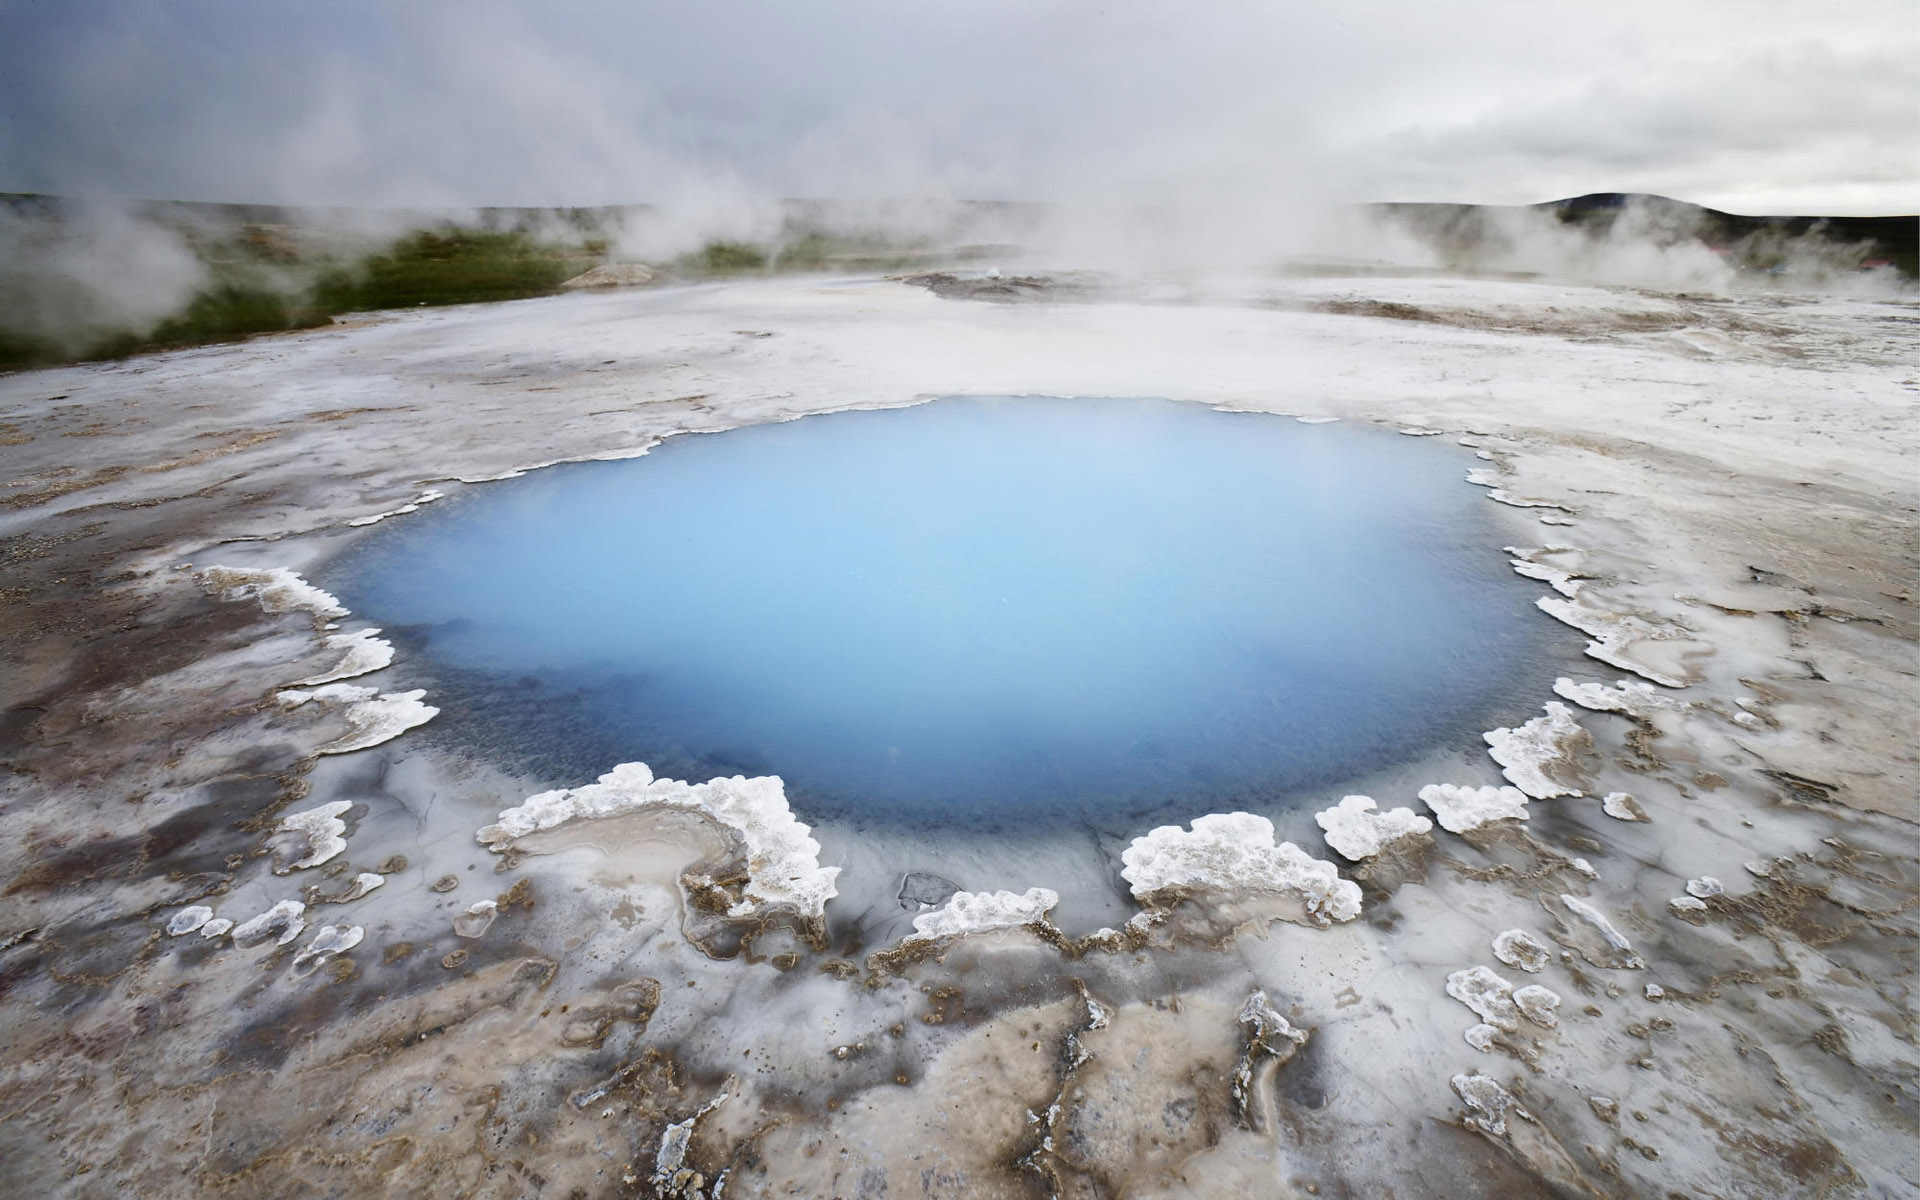 Hot spring in Hveravellir, Iceland - a scenic view of thermally active area